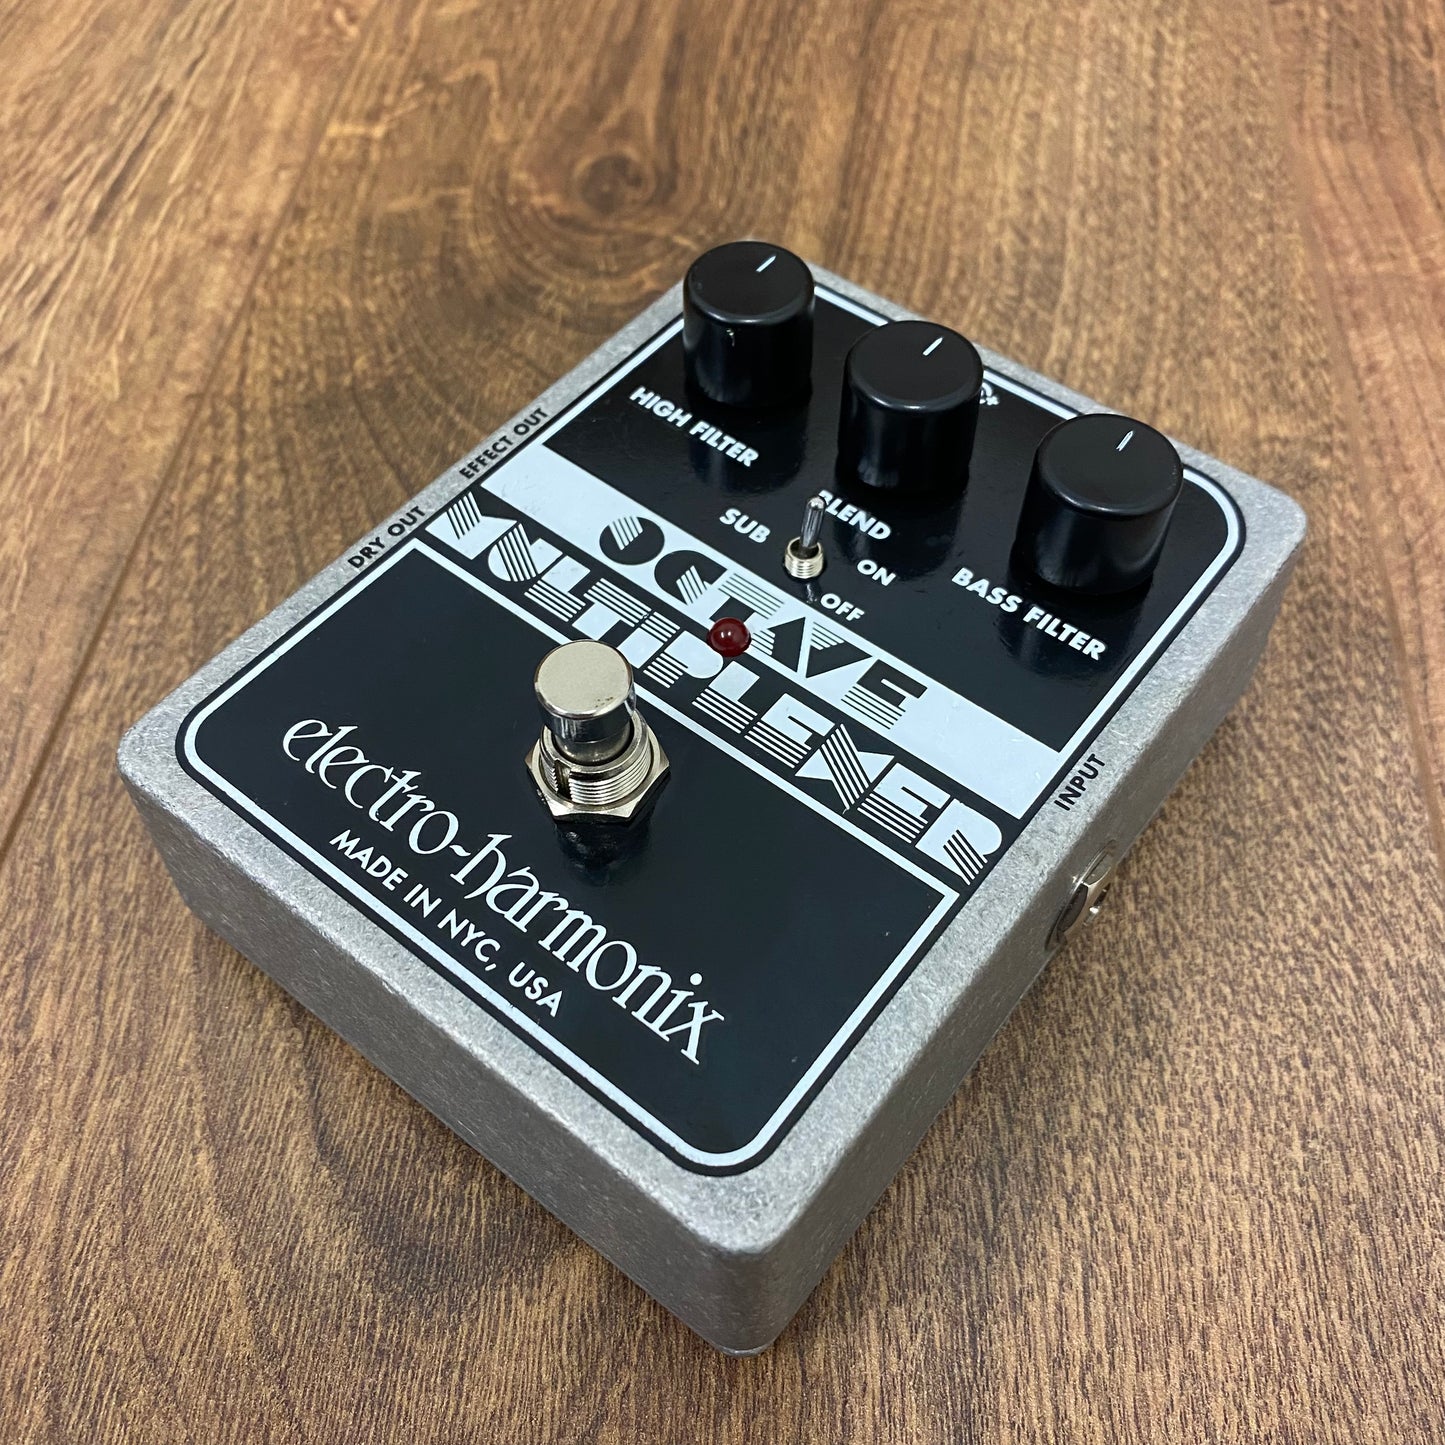 Pre-Owned Electro-Harmonix Octave Multiplexer Monophonic Octave Pedal